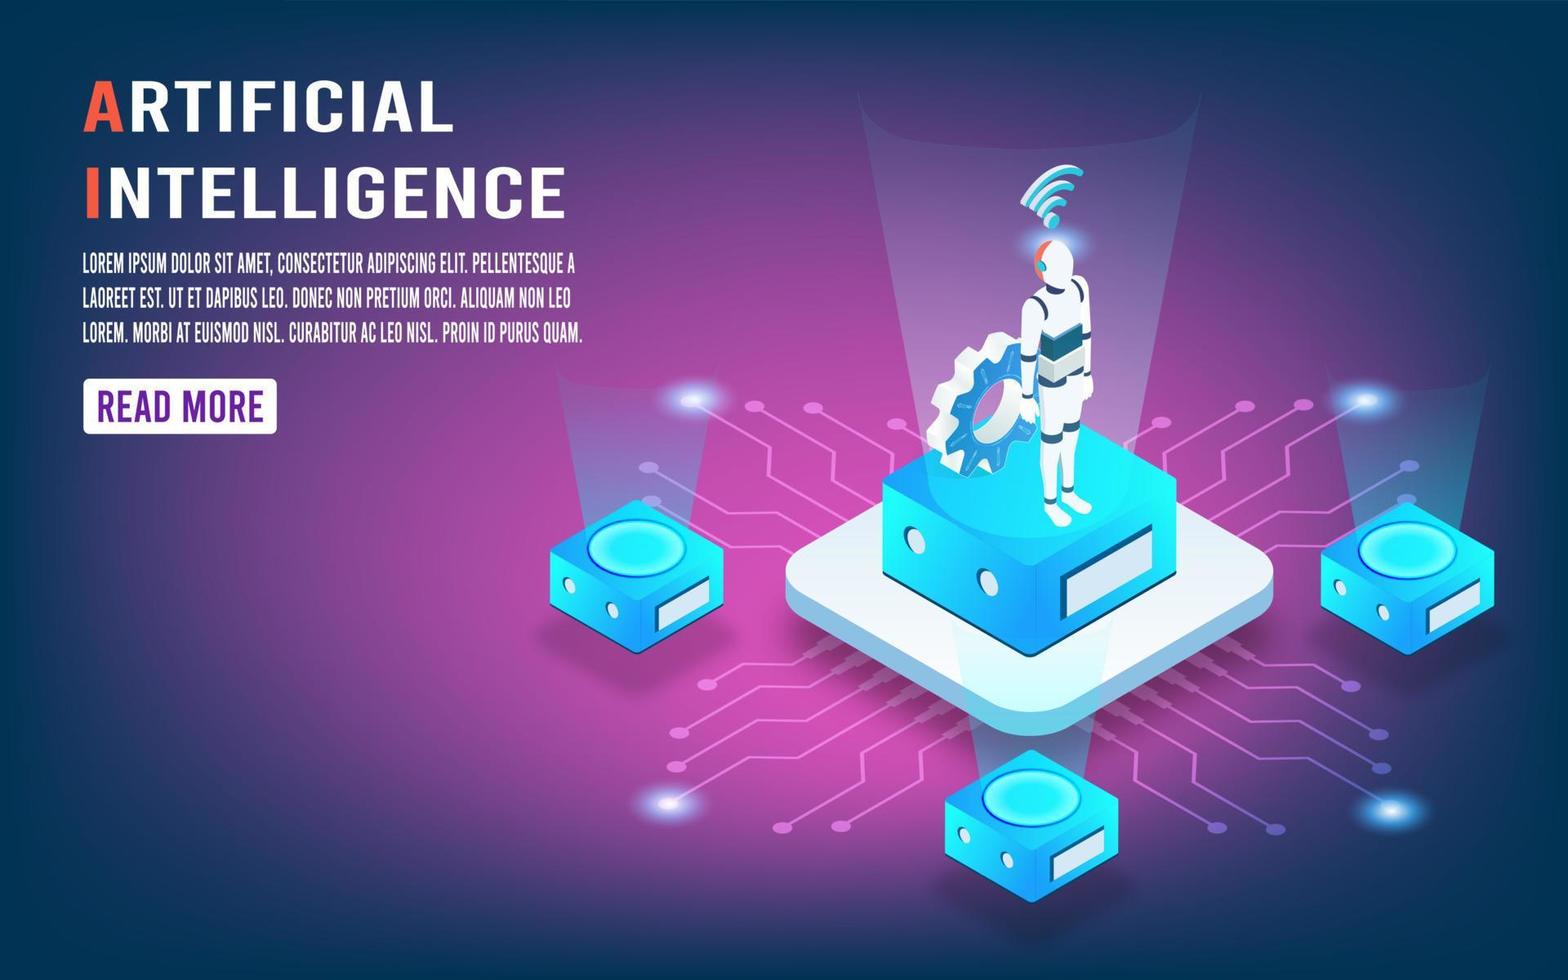 Artificial intelligence humanoid with neural network include big data. vector